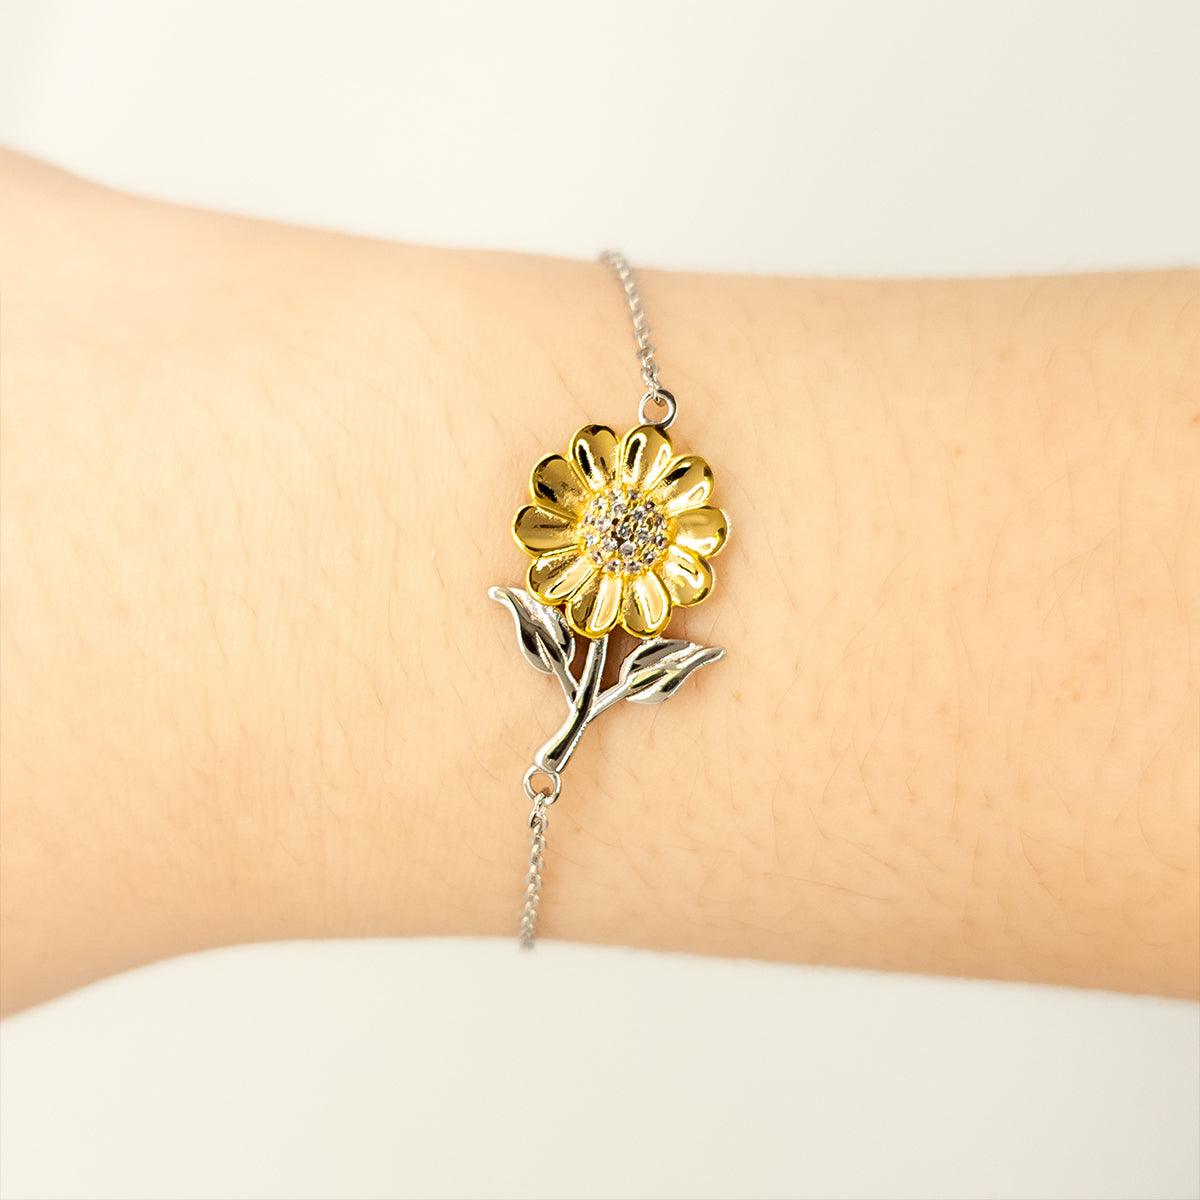 Remarkable Bailiff Gifts, Your dedication and hard work, Inspirational Birthday Christmas Unique Sunflower Bracelet For Bailiff, Coworkers, Men, Women, Friends - Mallard Moon Gift Shop